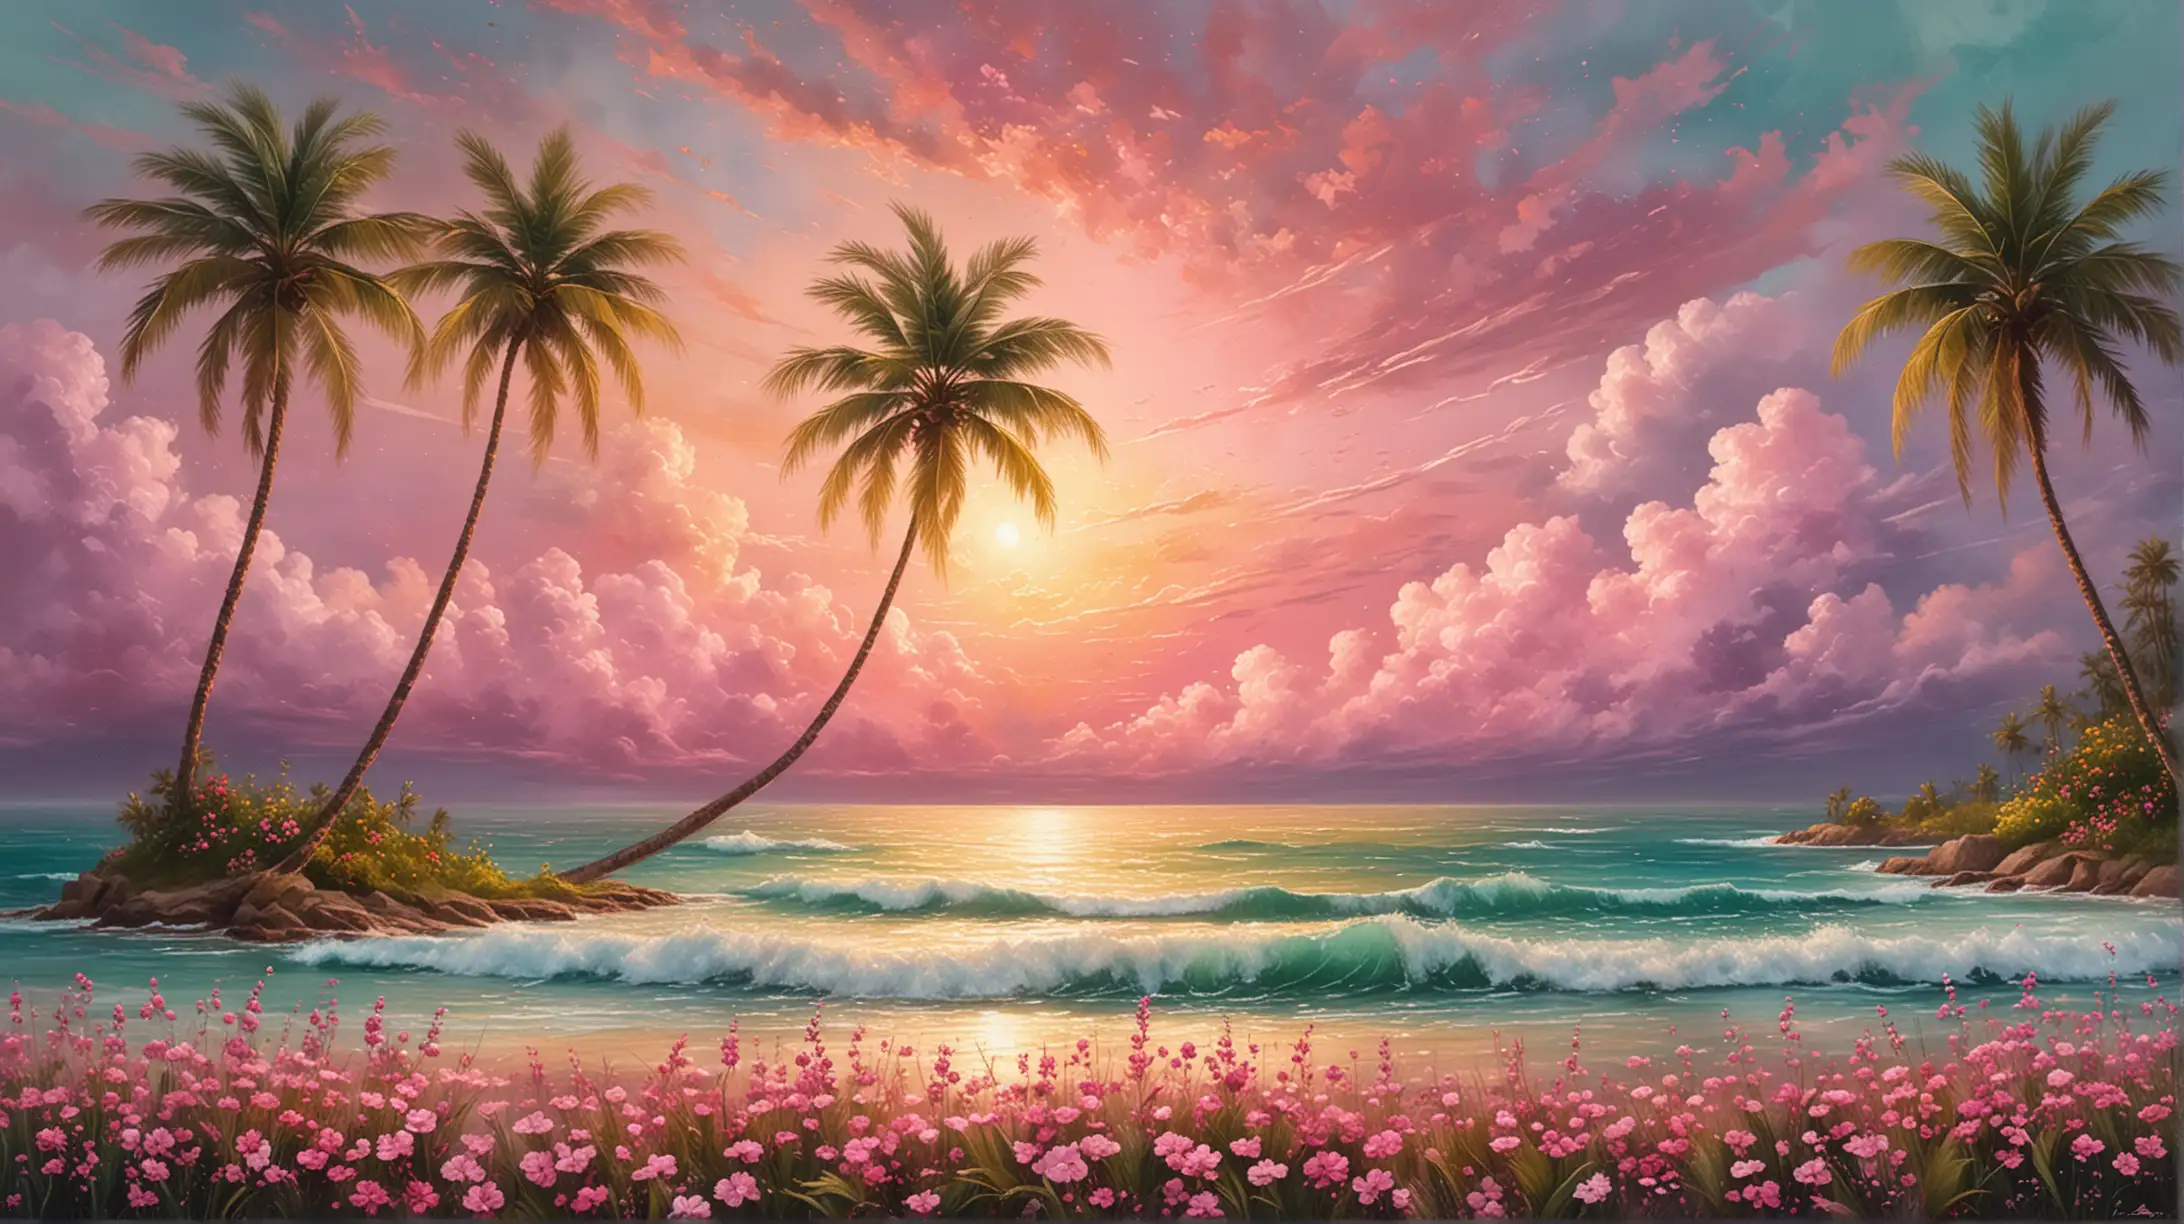 Abstract textured oil painting pink cloudy flowers and palm trees by the ocean shore with golden-green galaxy sky in the background.